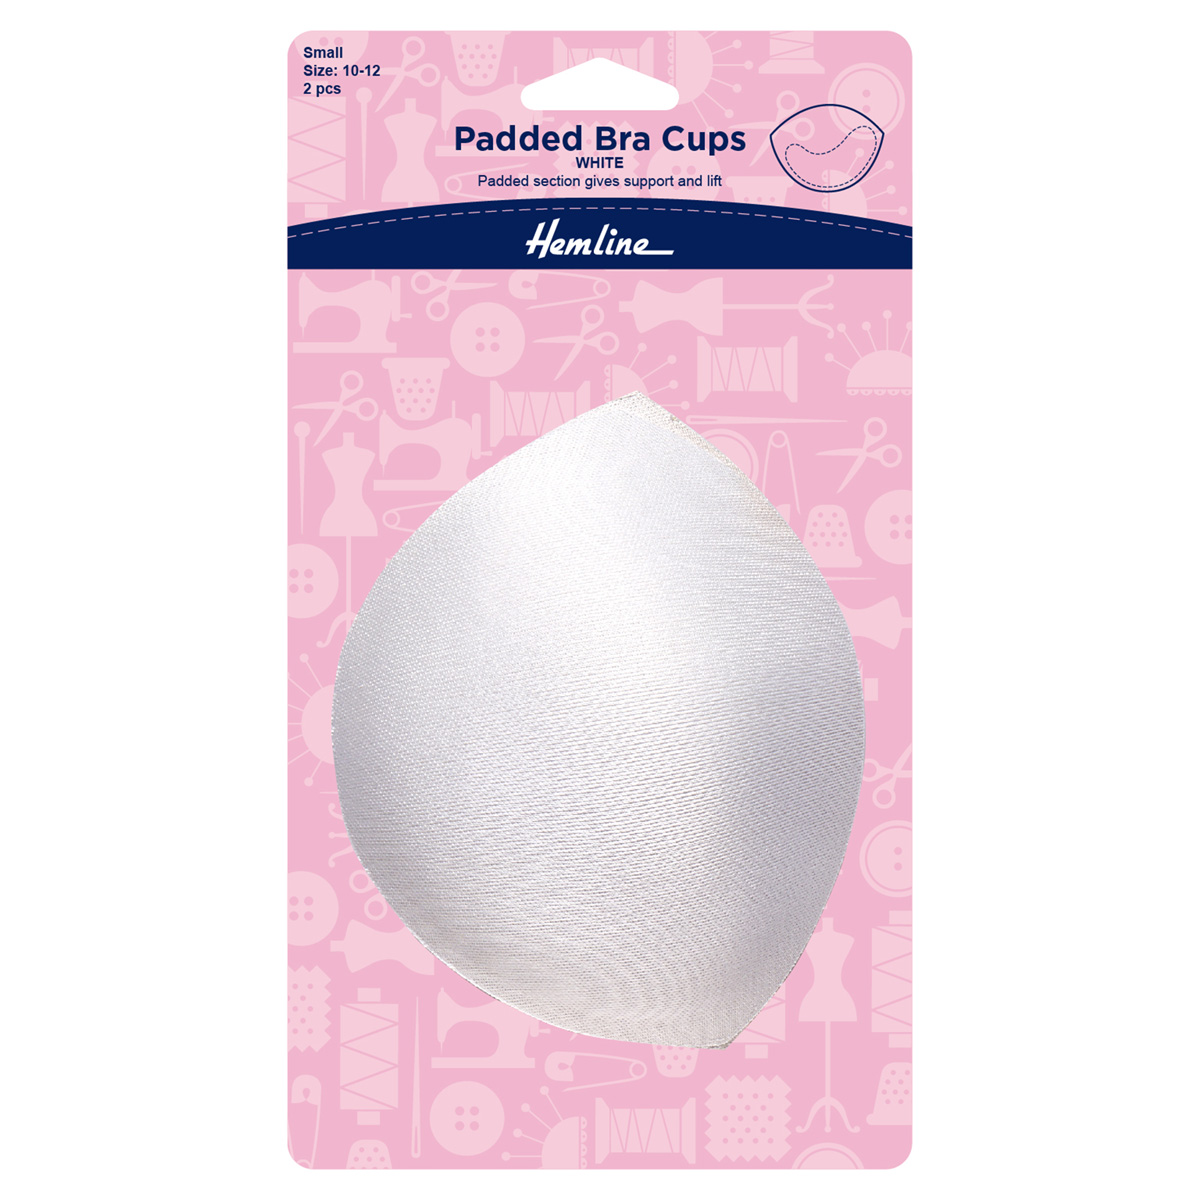 Padded Bra Cups: Small: White